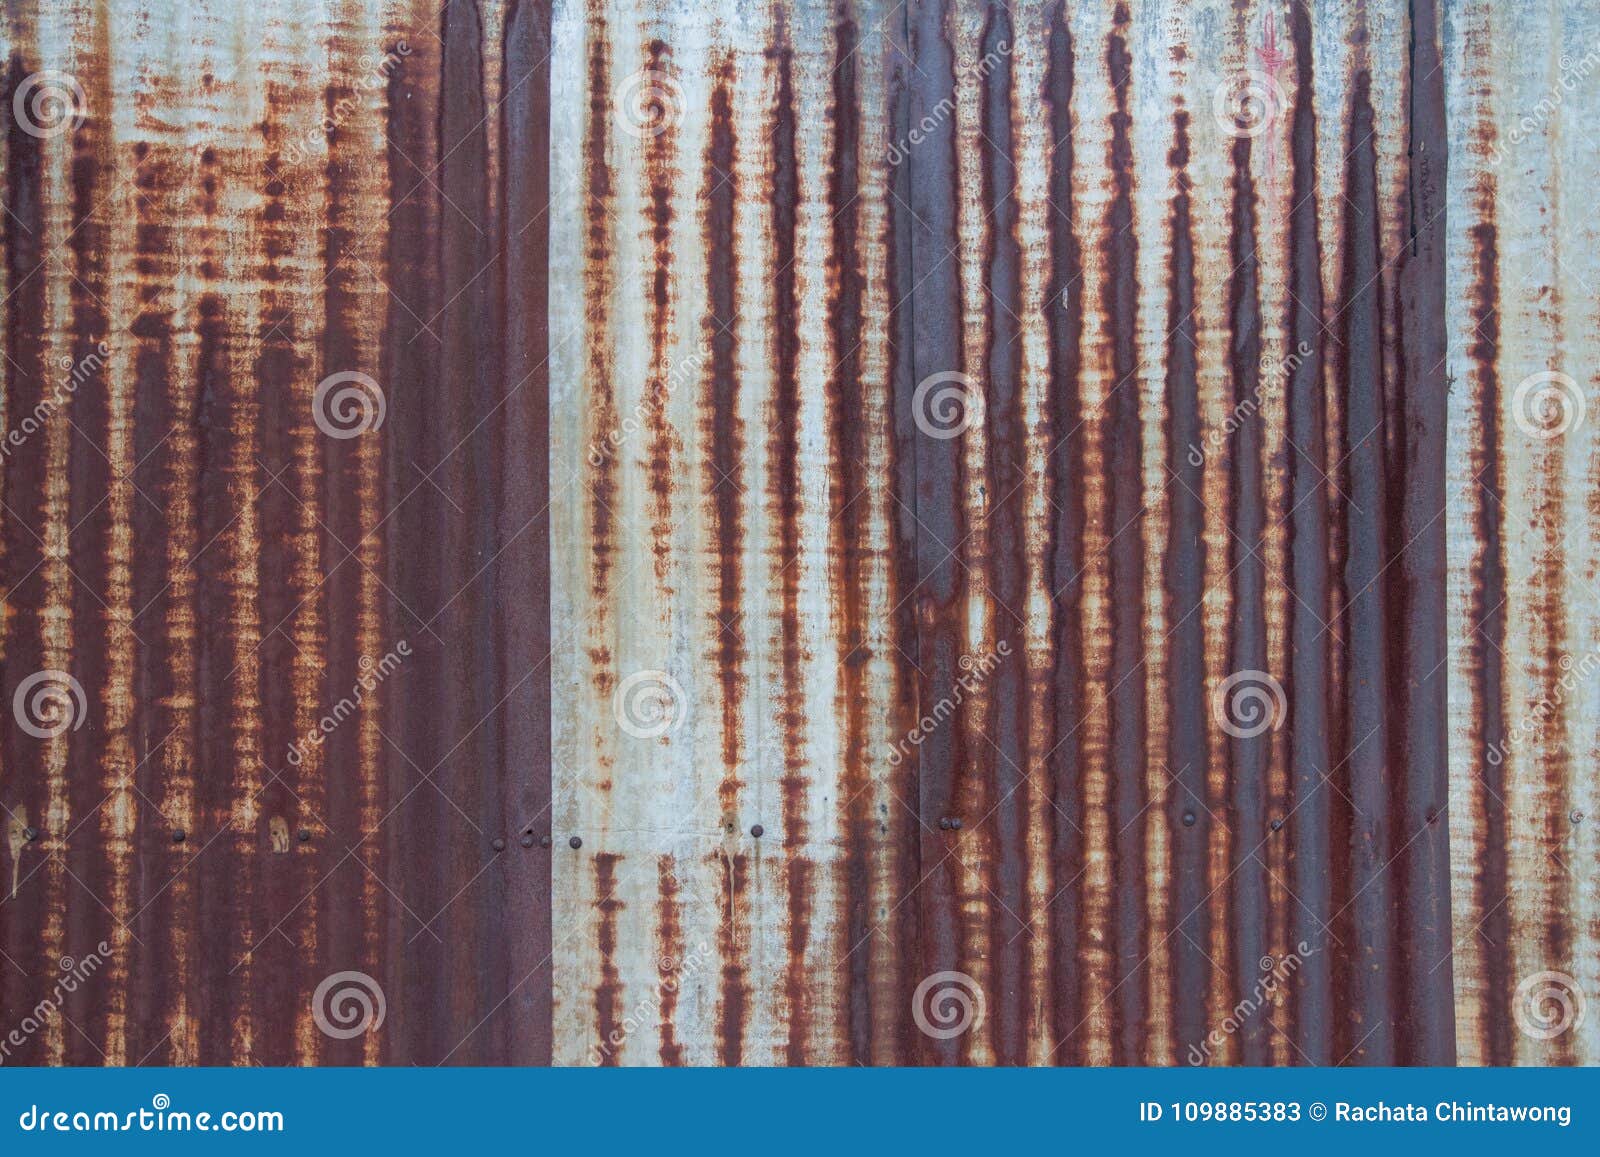 Rusty Metal Sheet Textured Wall Fill With Beautiful Rust Indicating Old State Stock Image